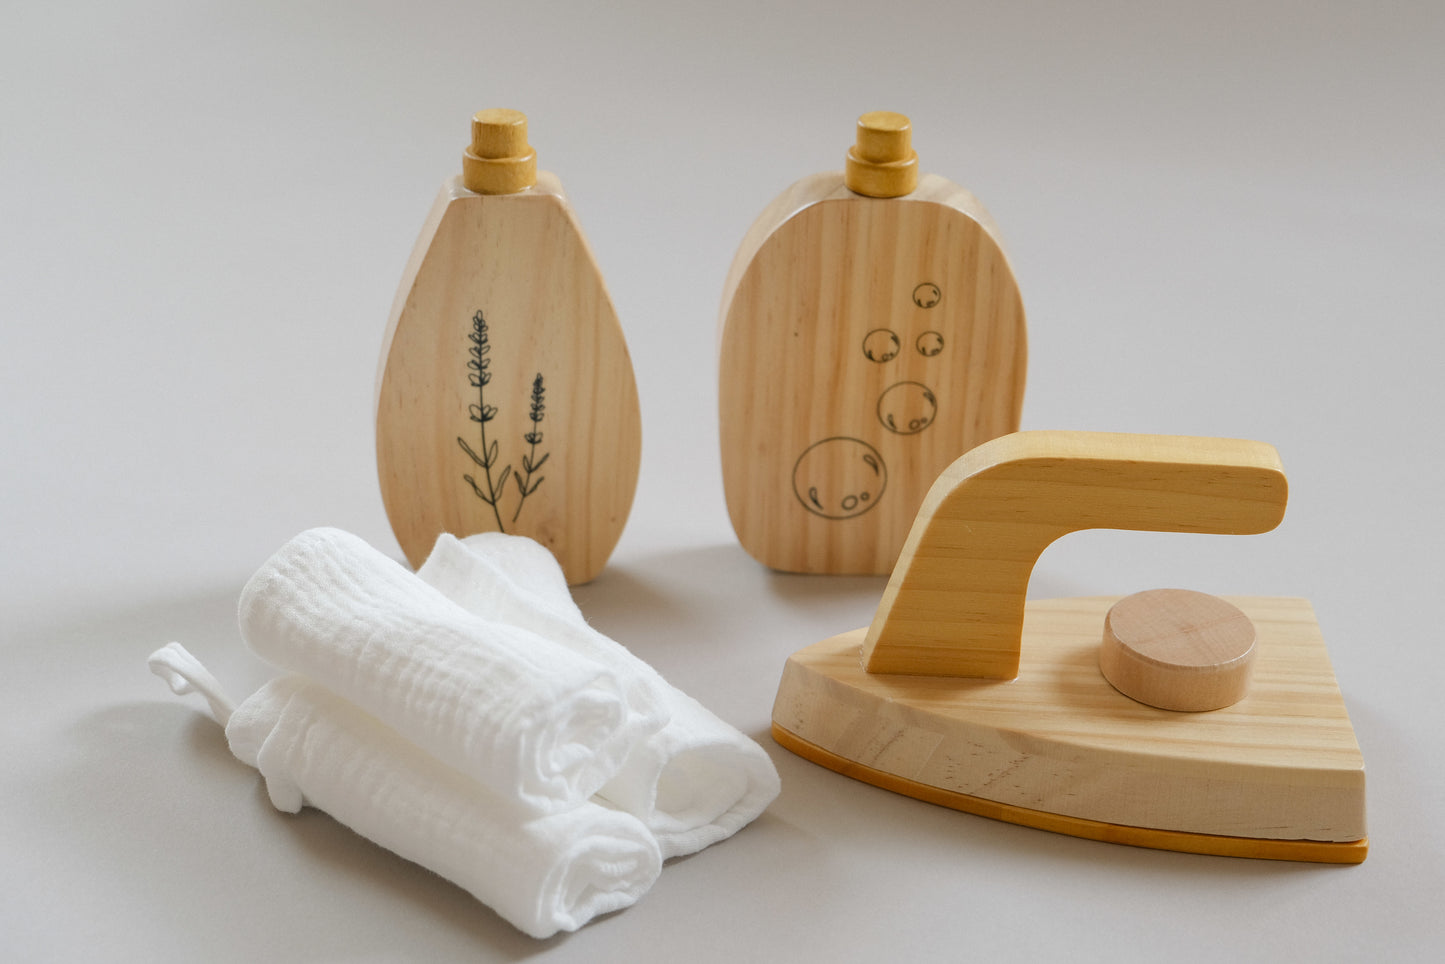 Wooden Laundry Play-set